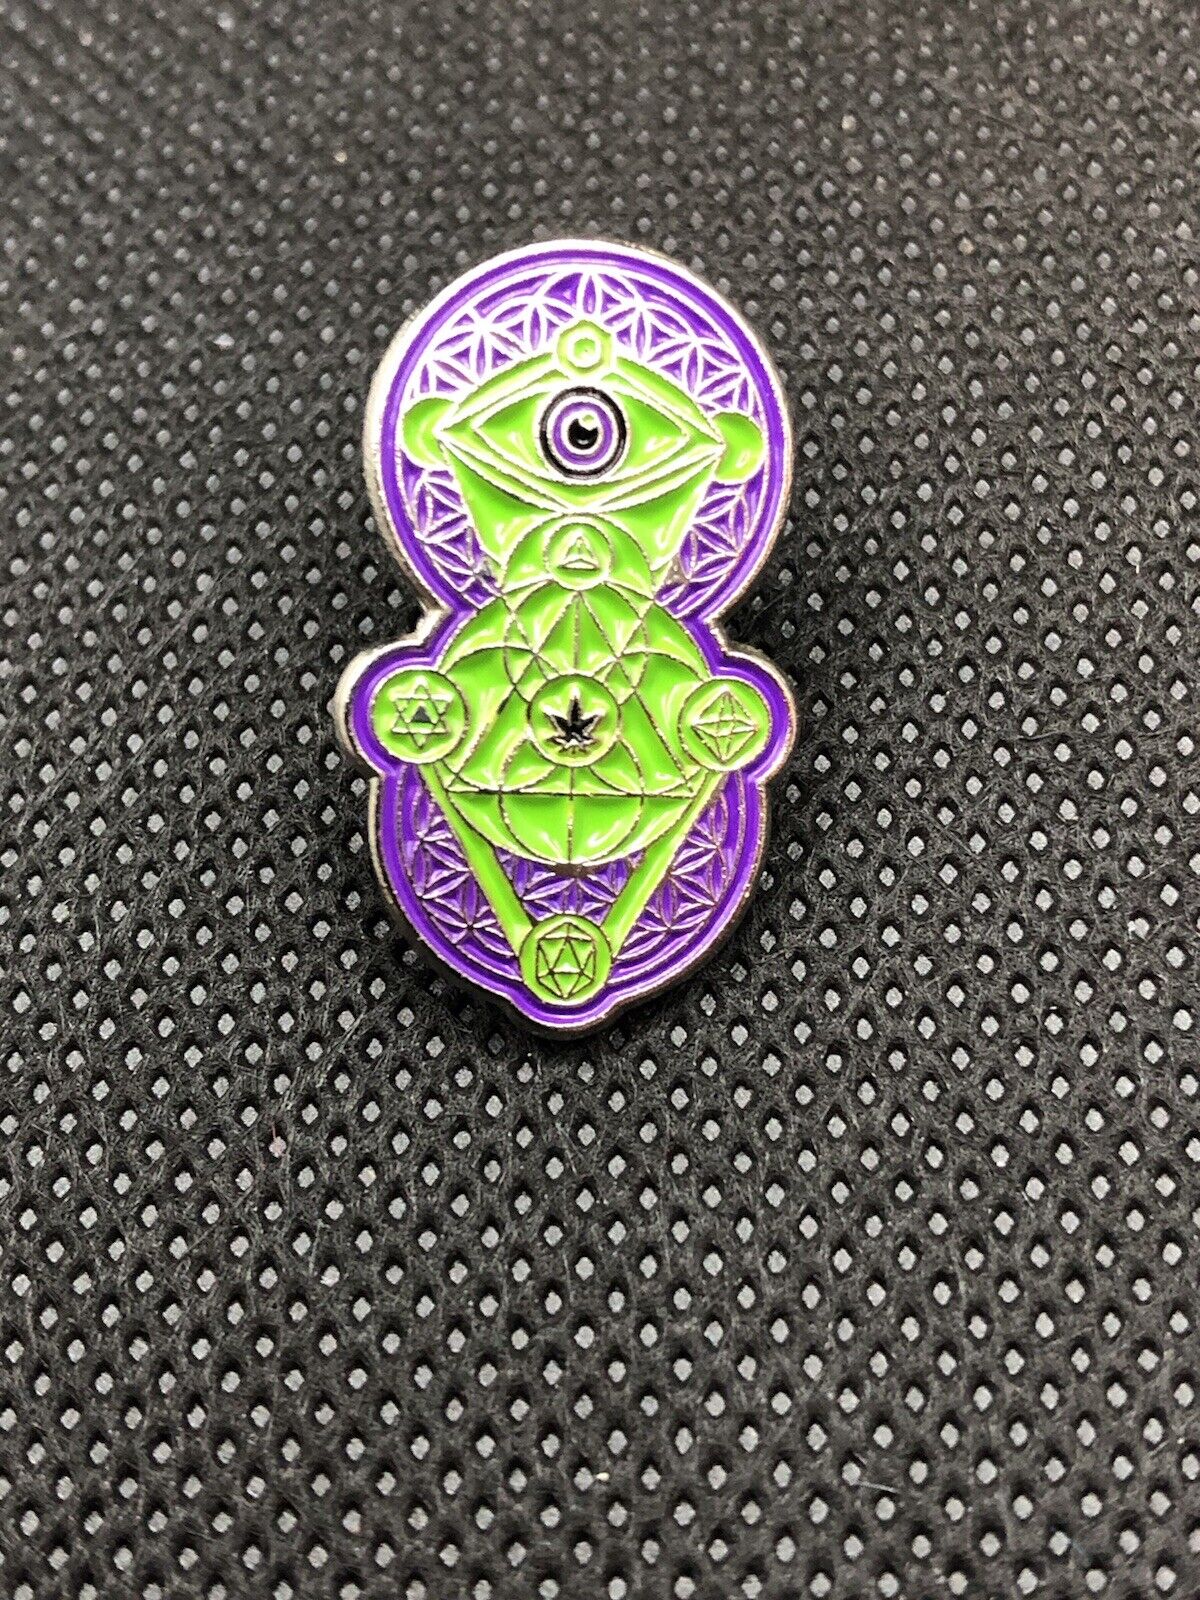 anomaly concentrates enamel pin